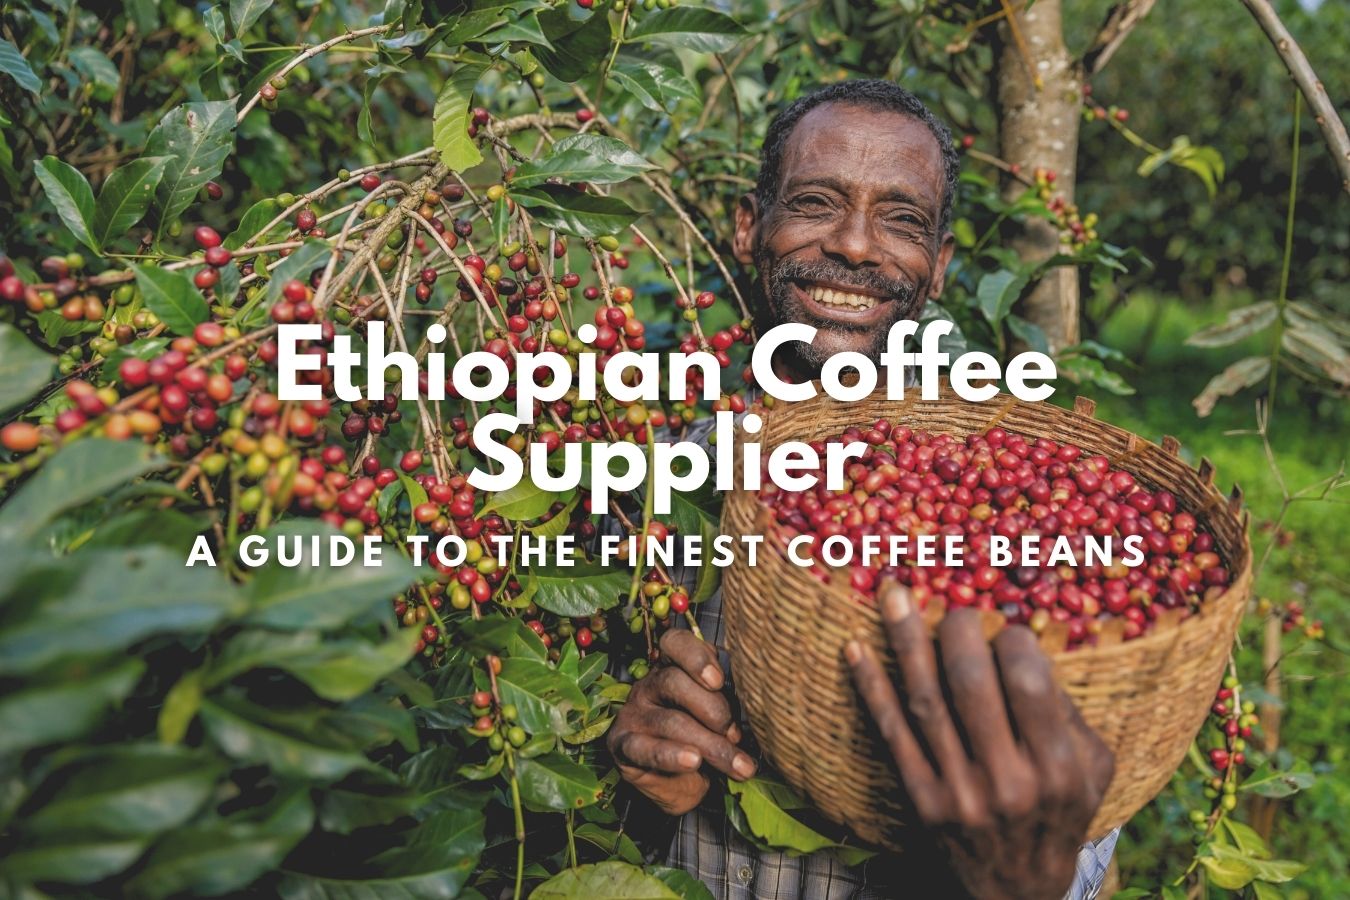 Ethiopian Coffee Supplier A Guide to the Finest Coffee Beans